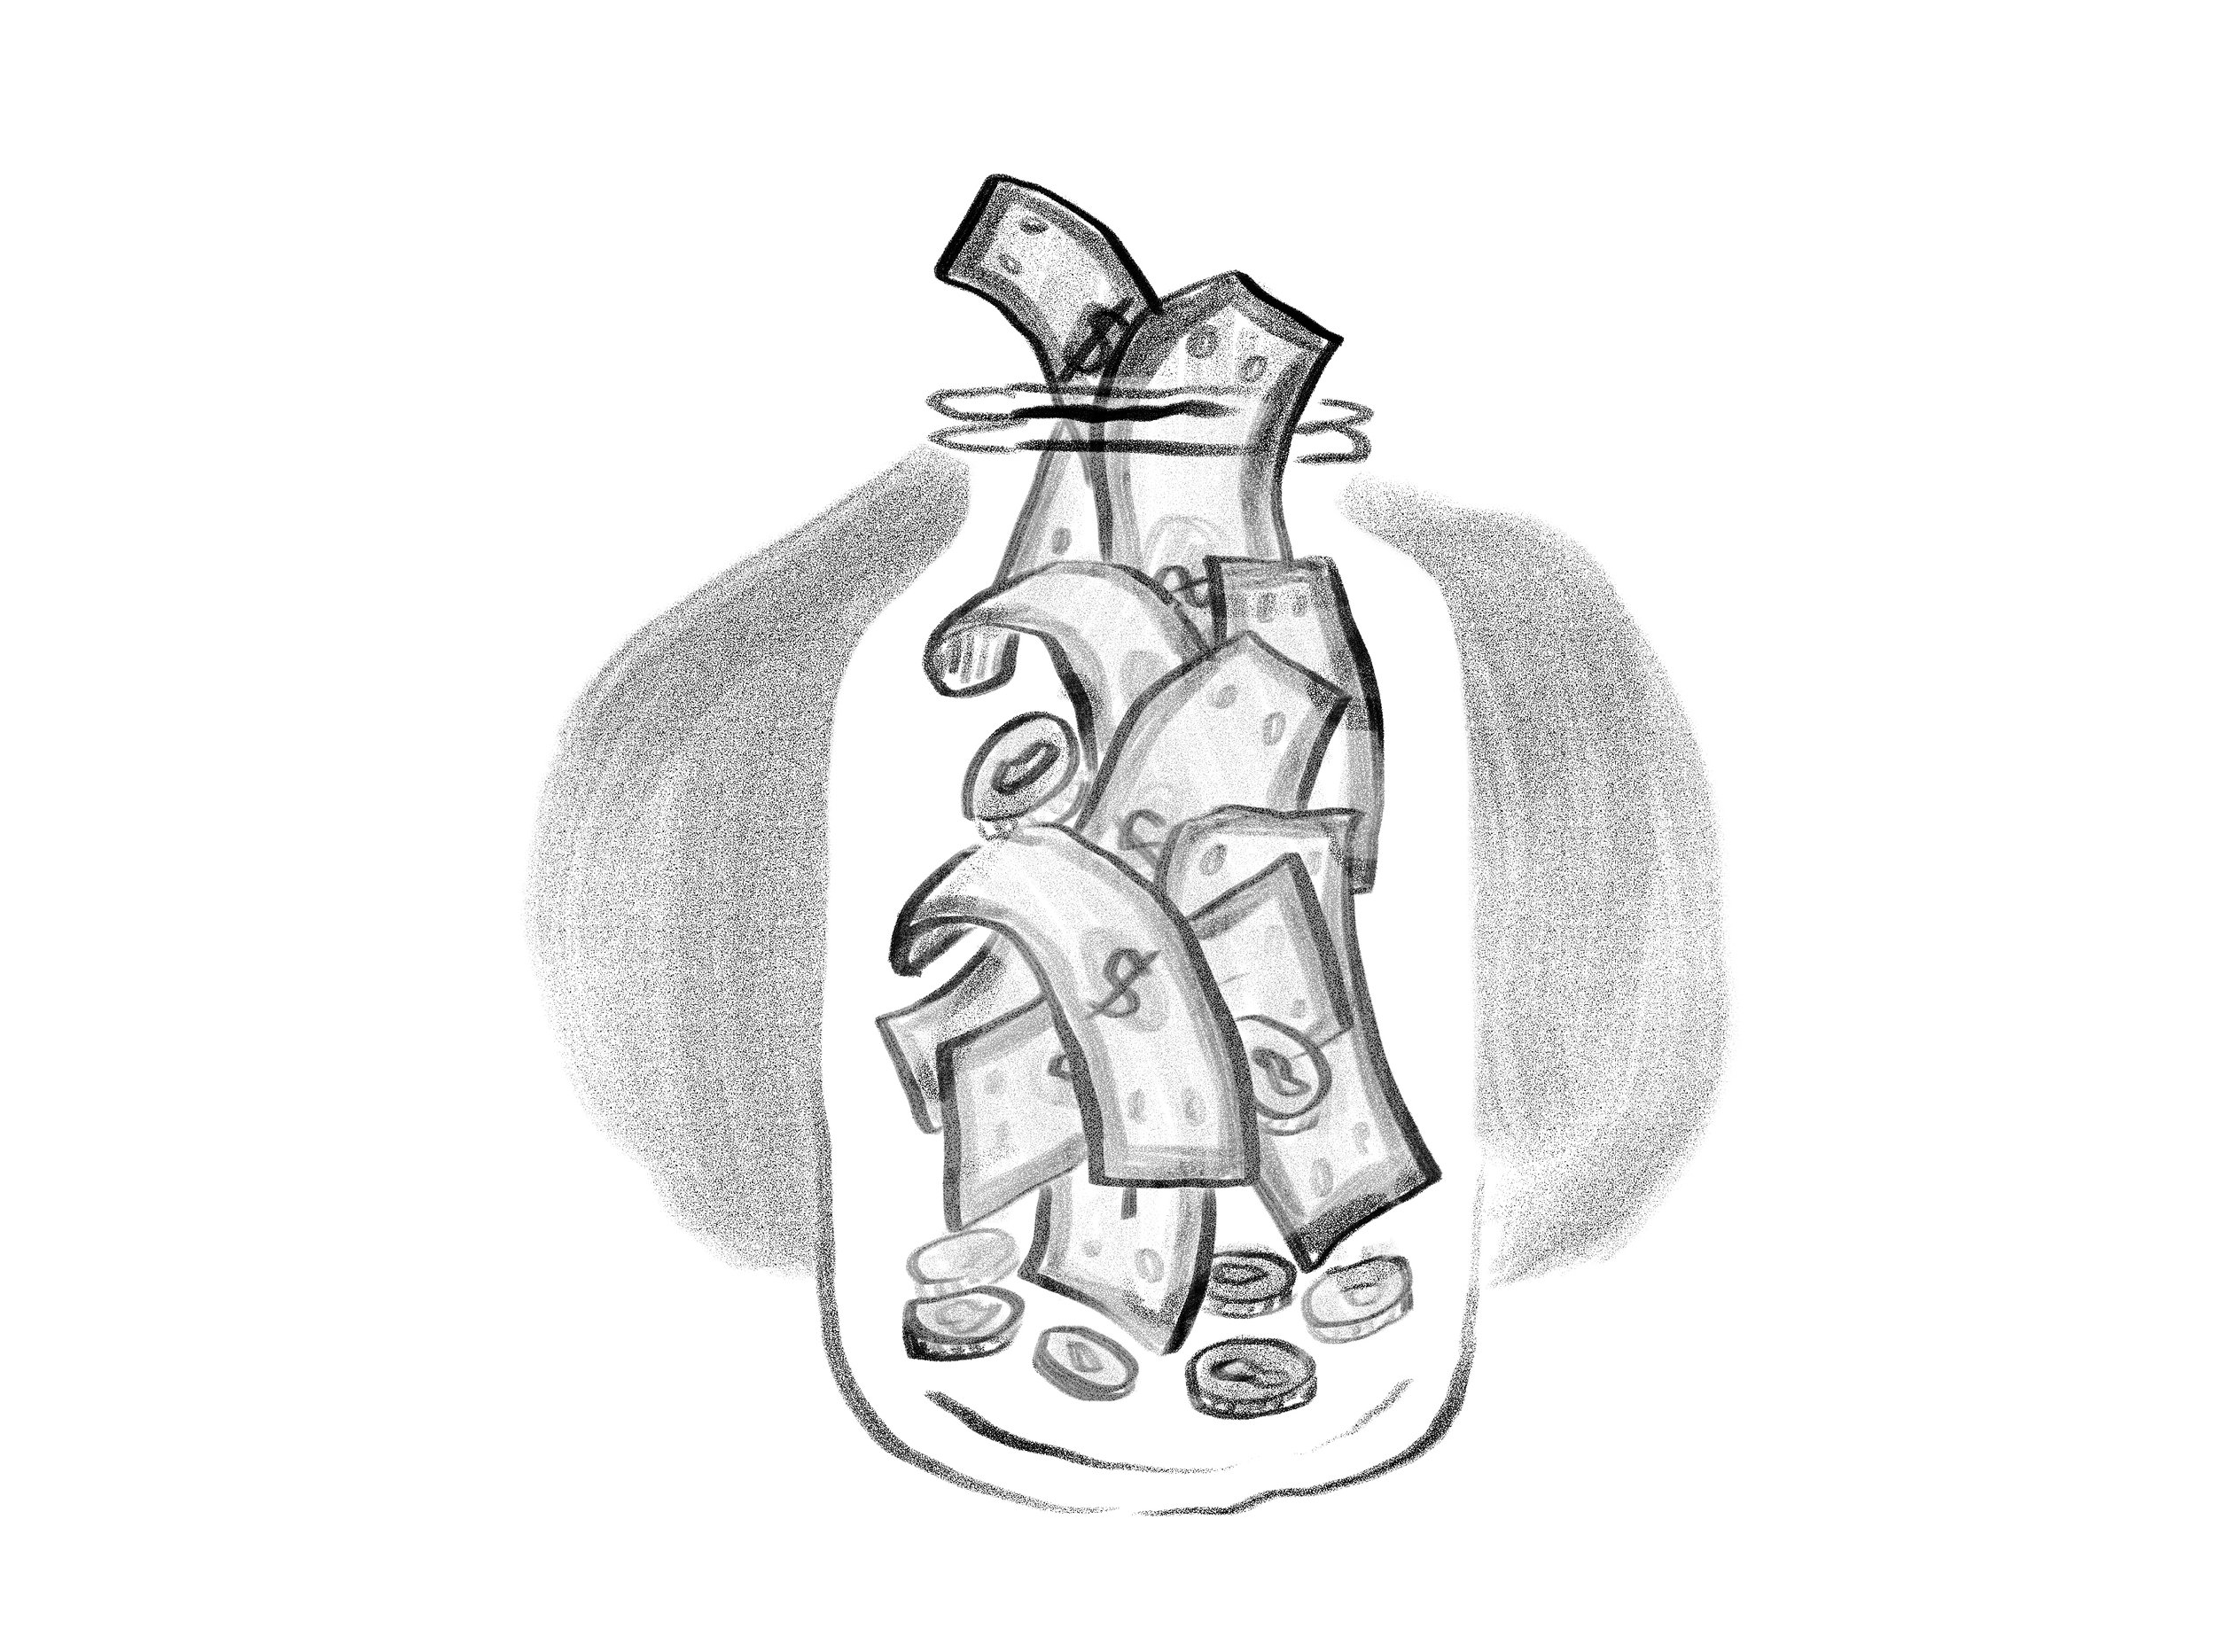 Baking is Messy and So is Life Interior Illustrations-Jar of Money copy.jpg